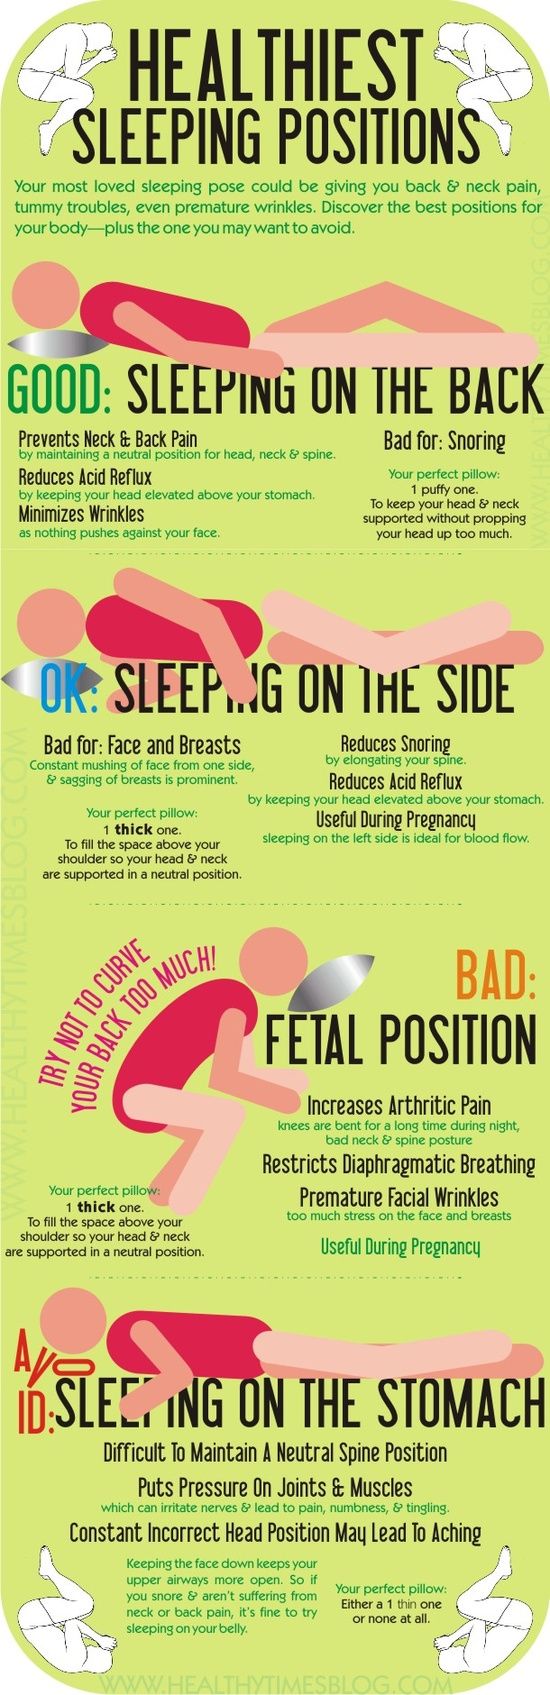 Healthiest Sleeping Positions Align Medical And Chiropractic Blog